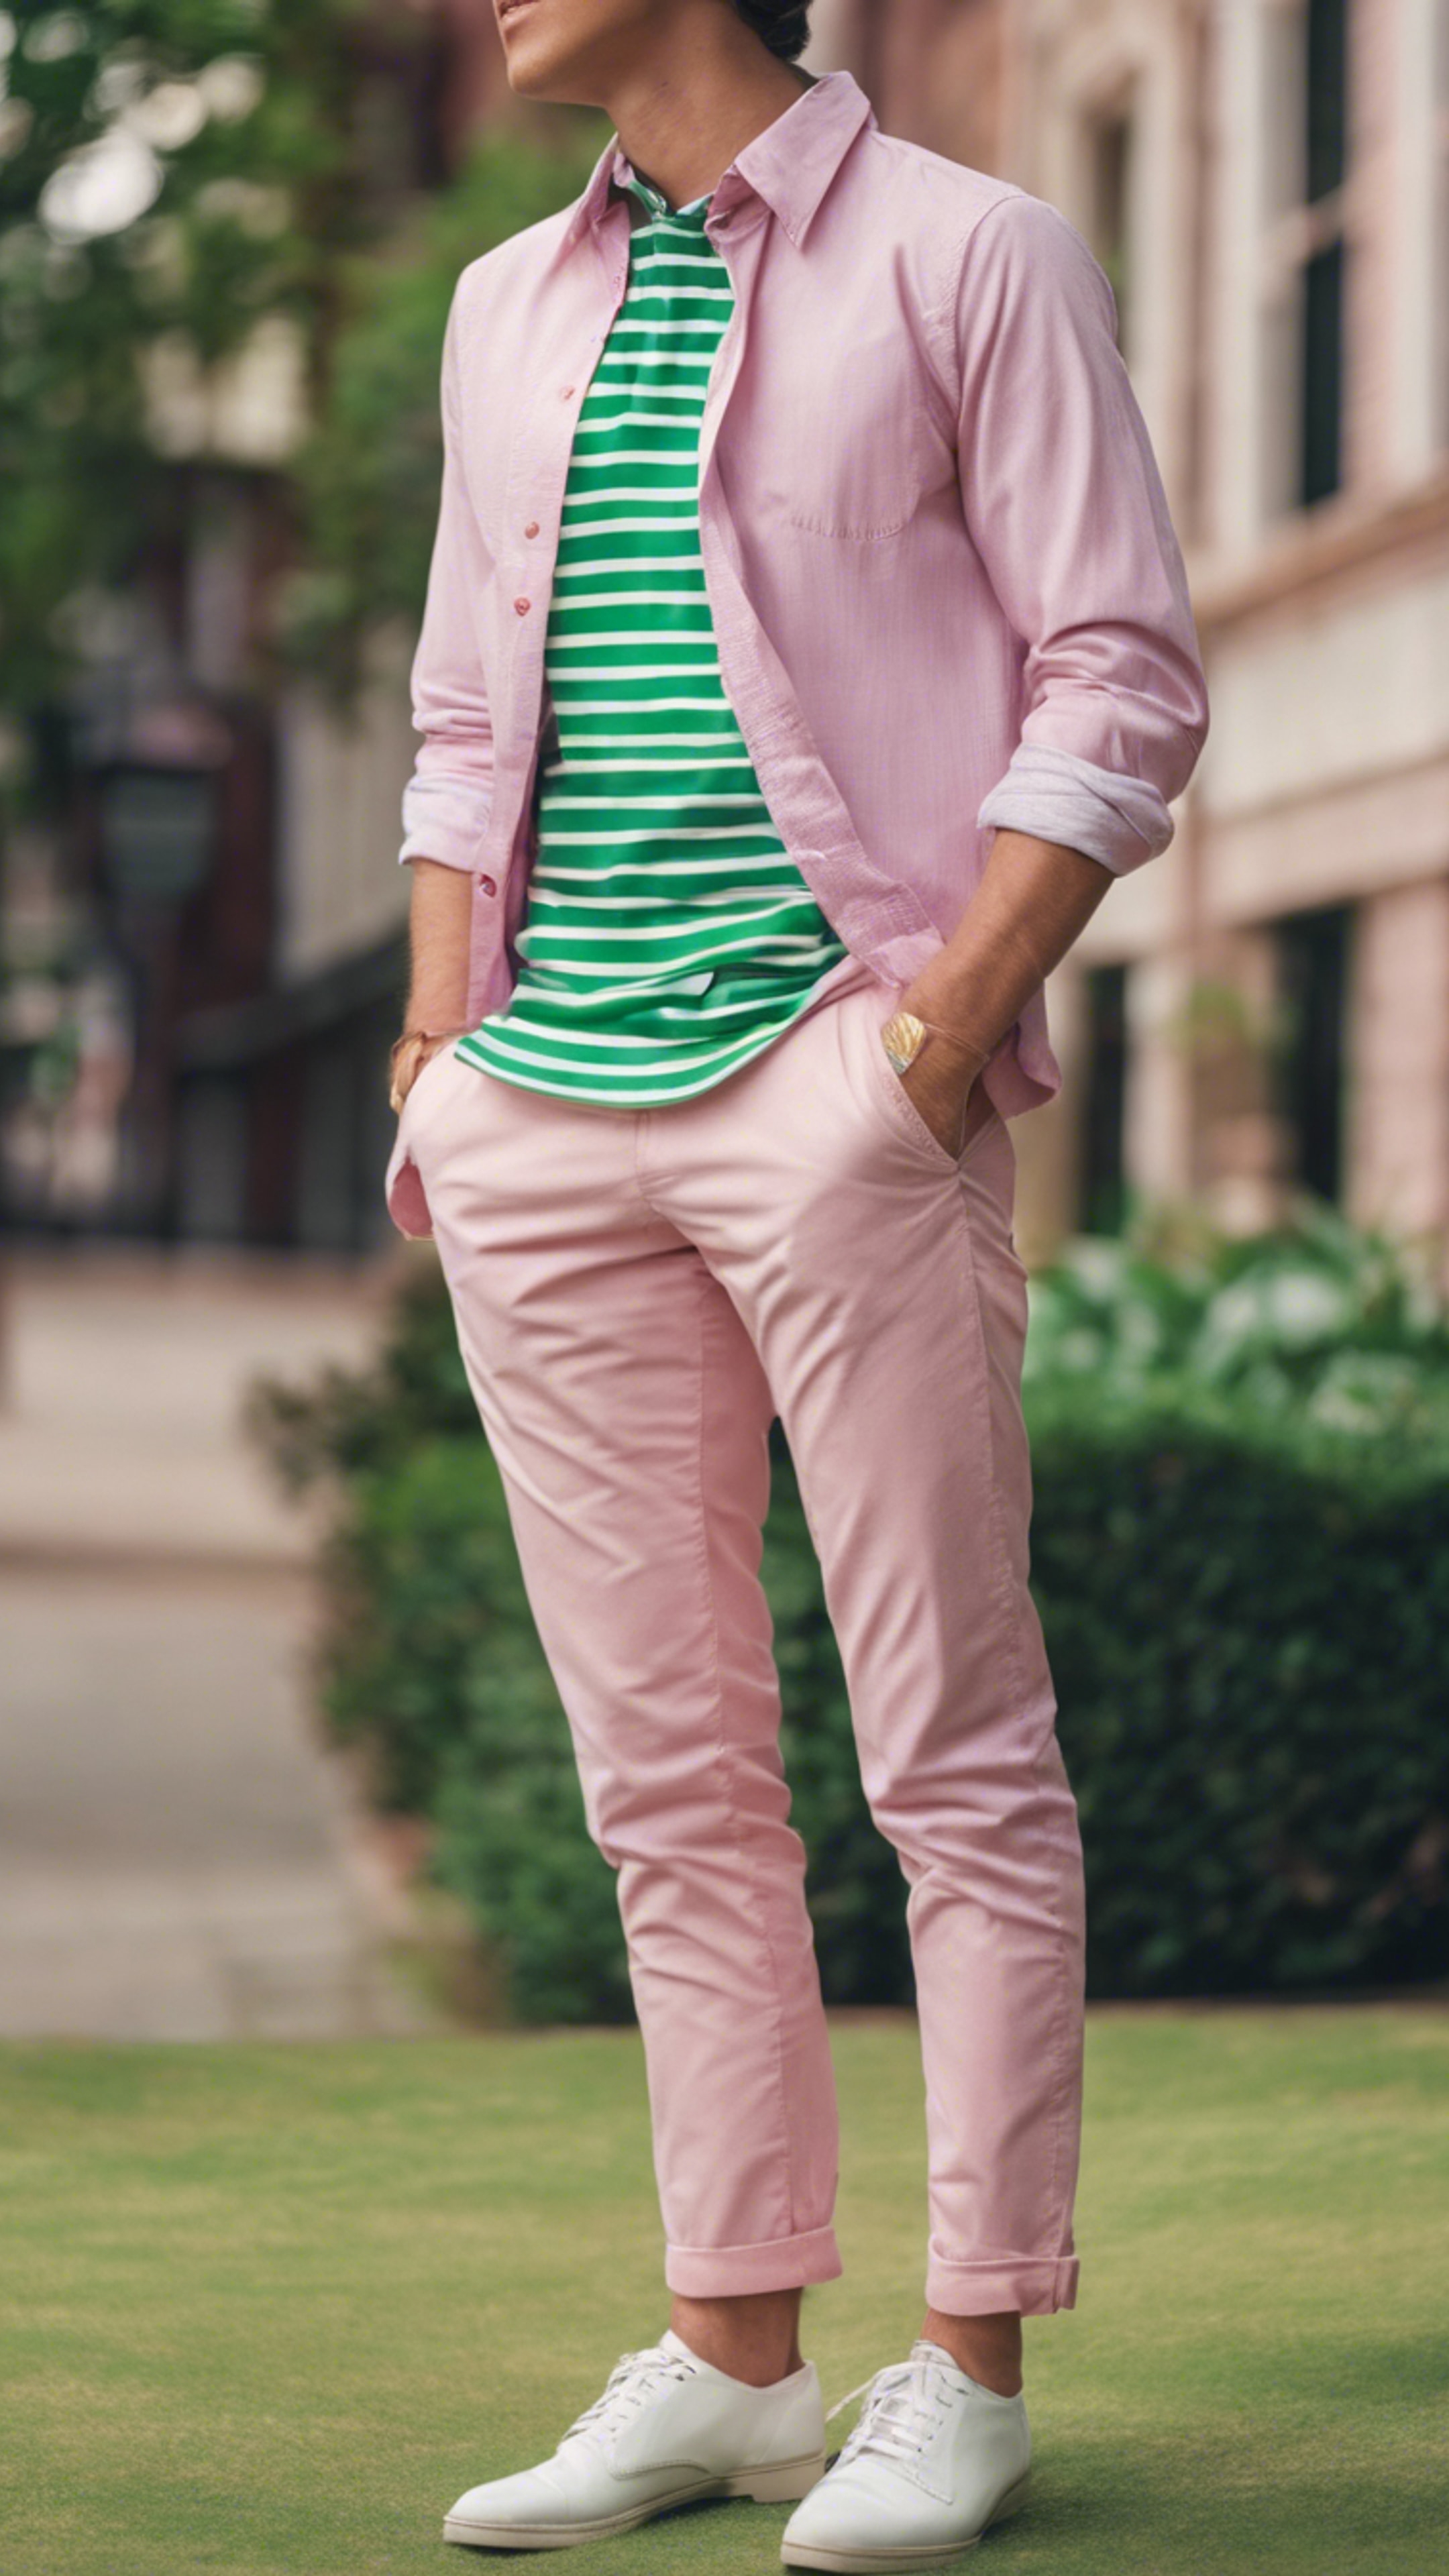 A classic preppy outfit in pink chinos with a green striped Oxford shirt. Wallpaper[7b2809c9502f40299443]